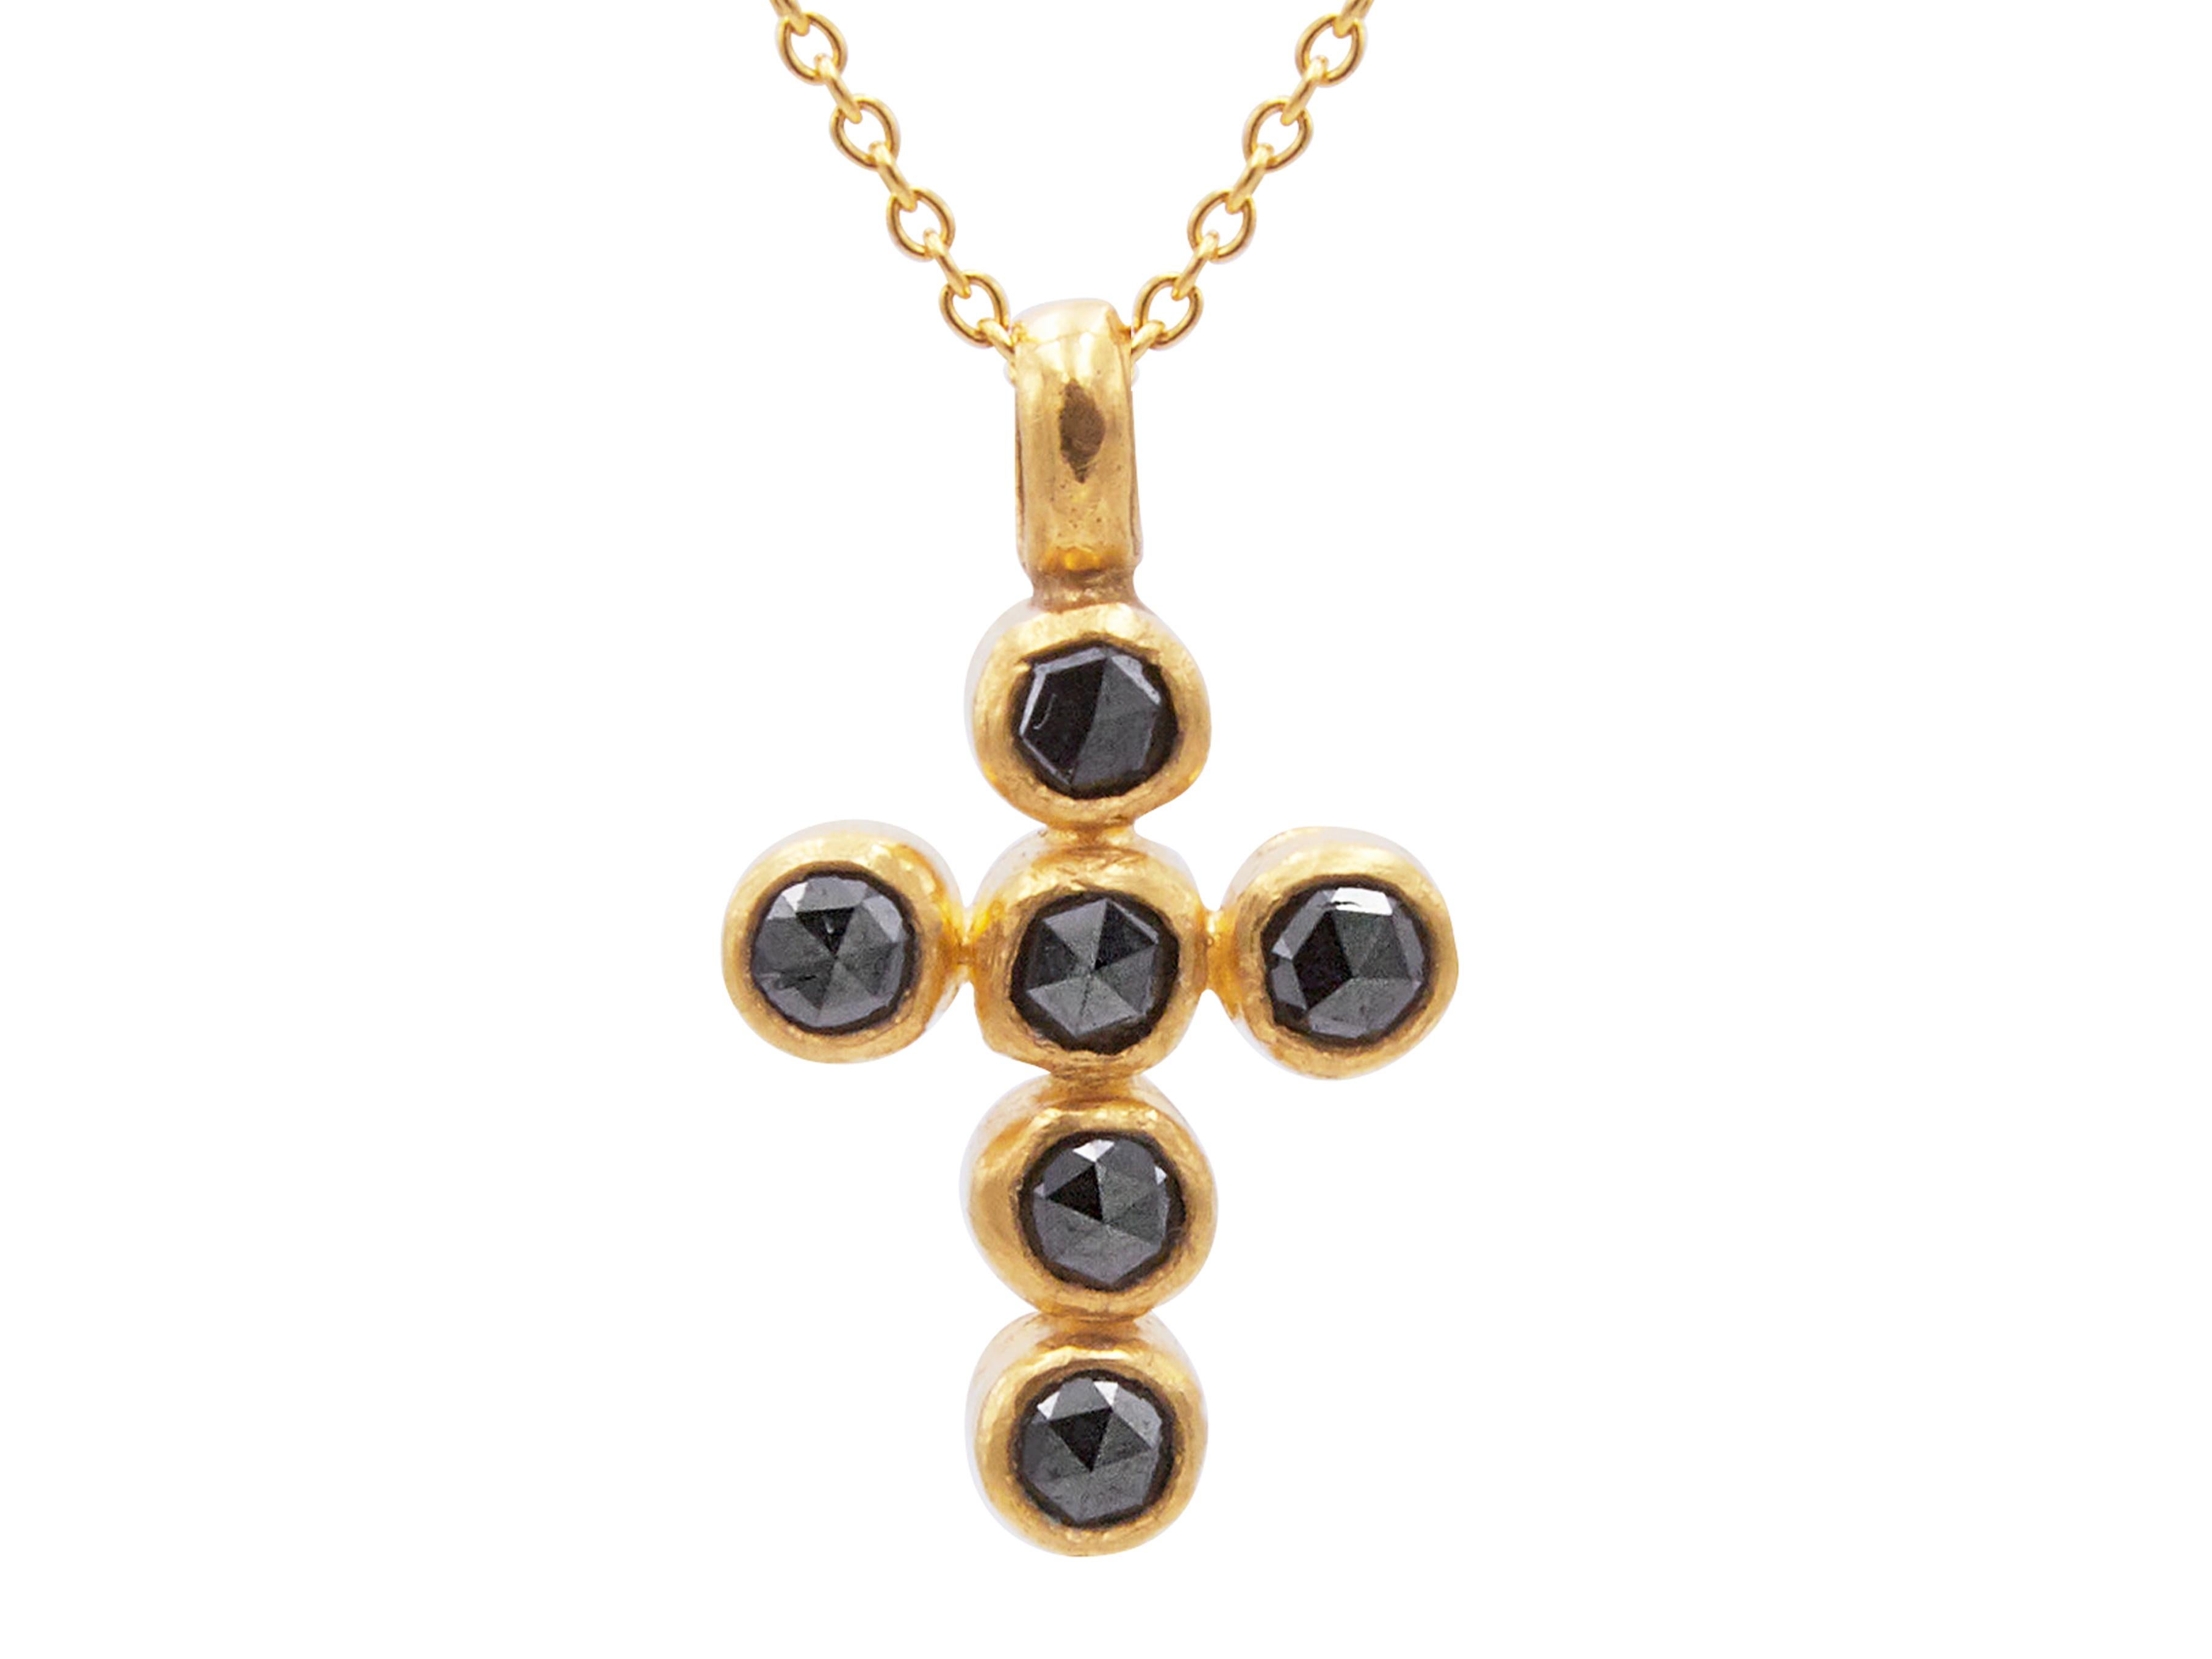 GURHAN one-of-a-kind pendant necklace in 24 Karat hammered yellow gold featuring (6) 3.60mm rosecut Black Diamonds, 1.16cts. 16-18